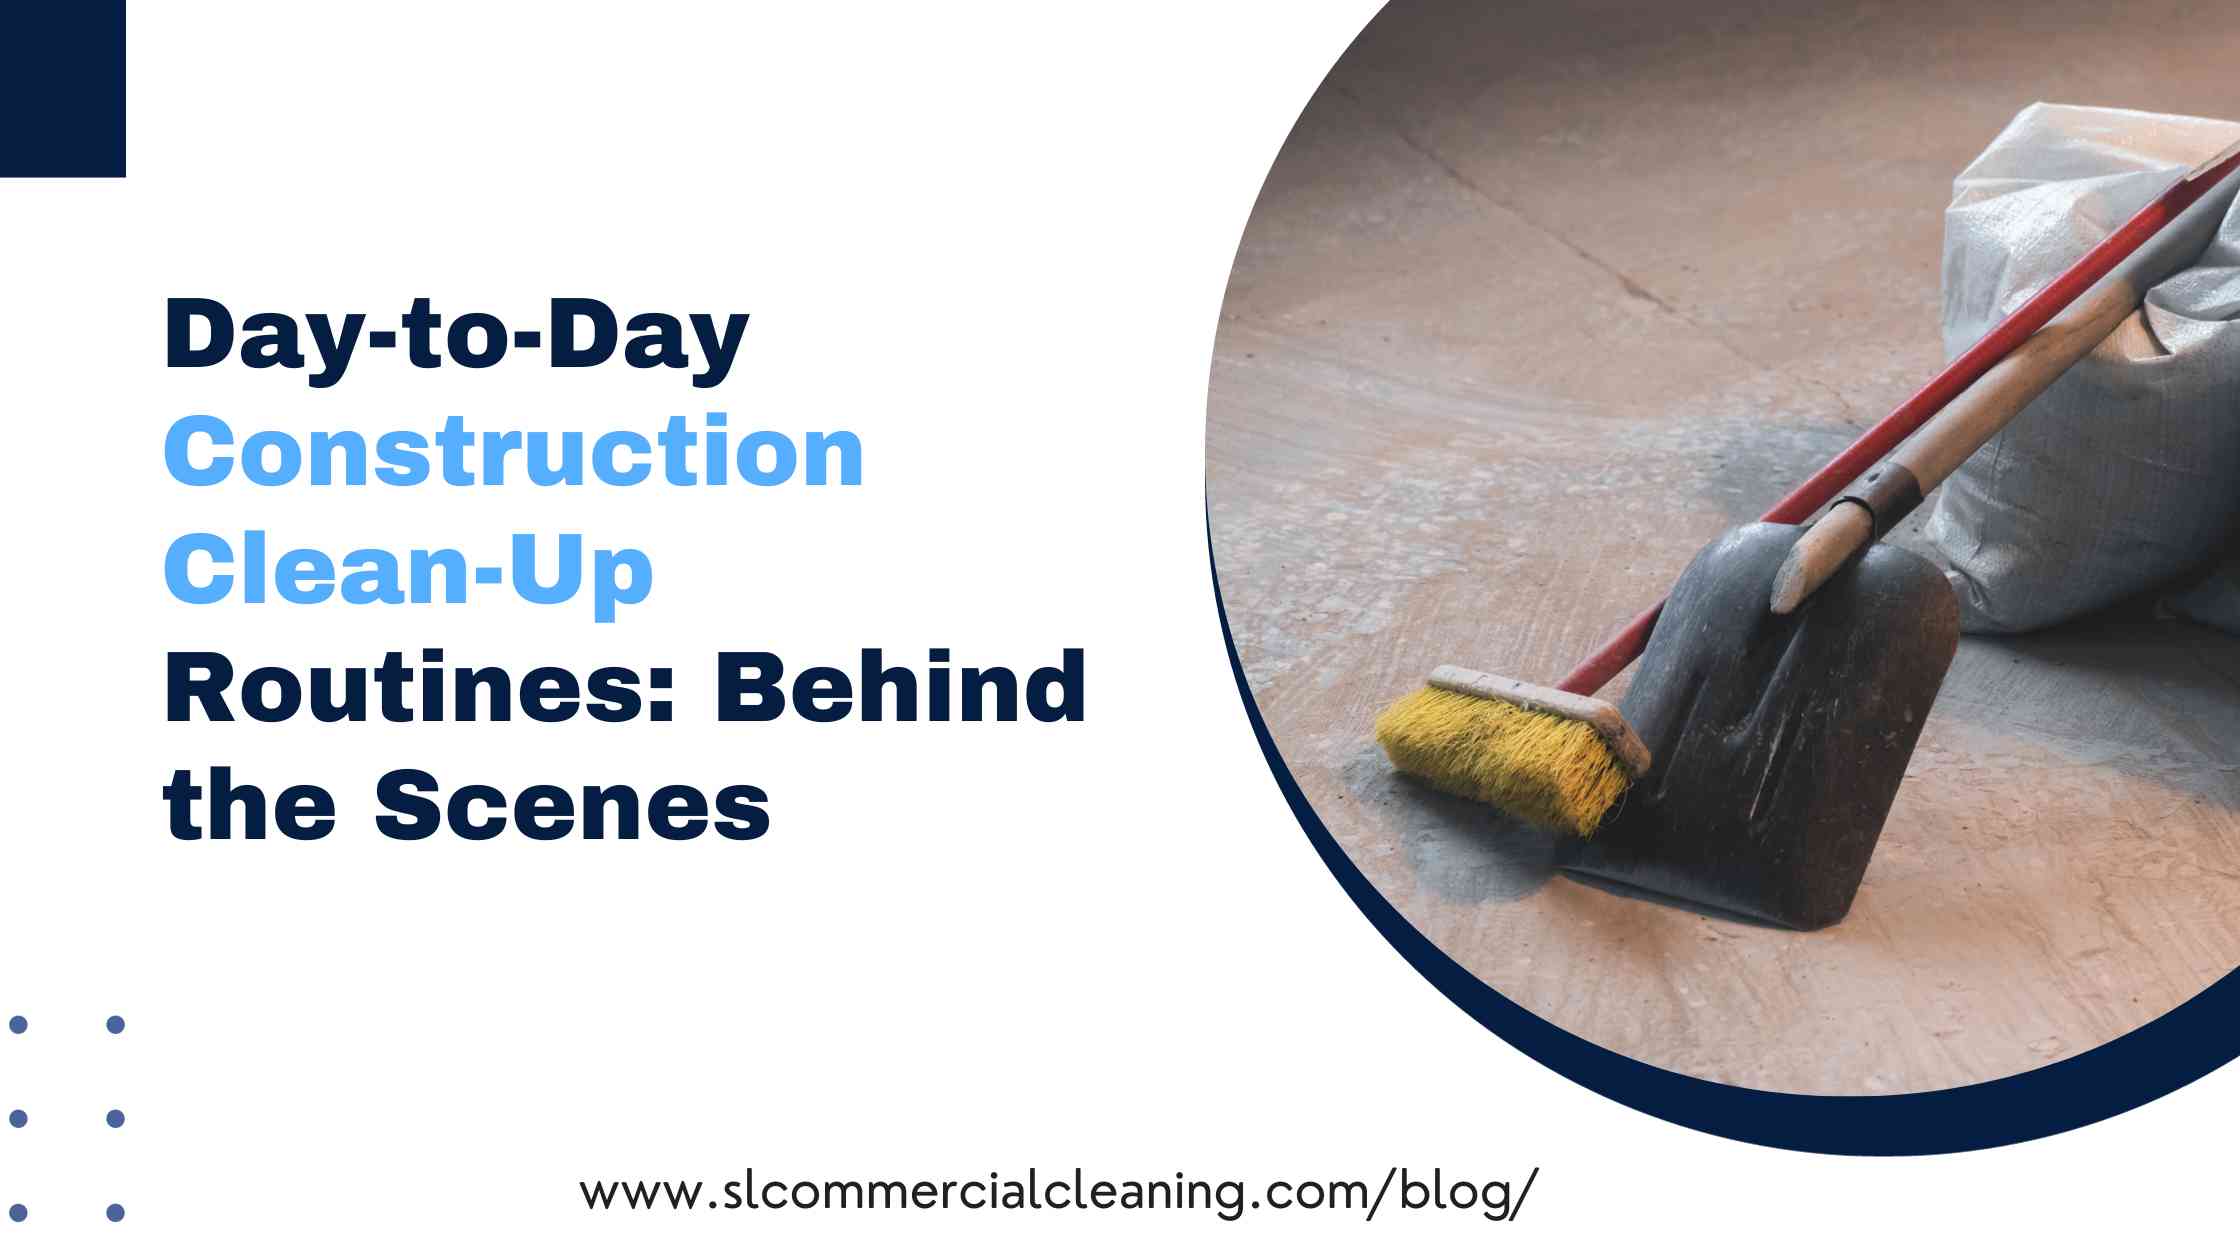 Day-to-Day Construction Clean-Up Routines